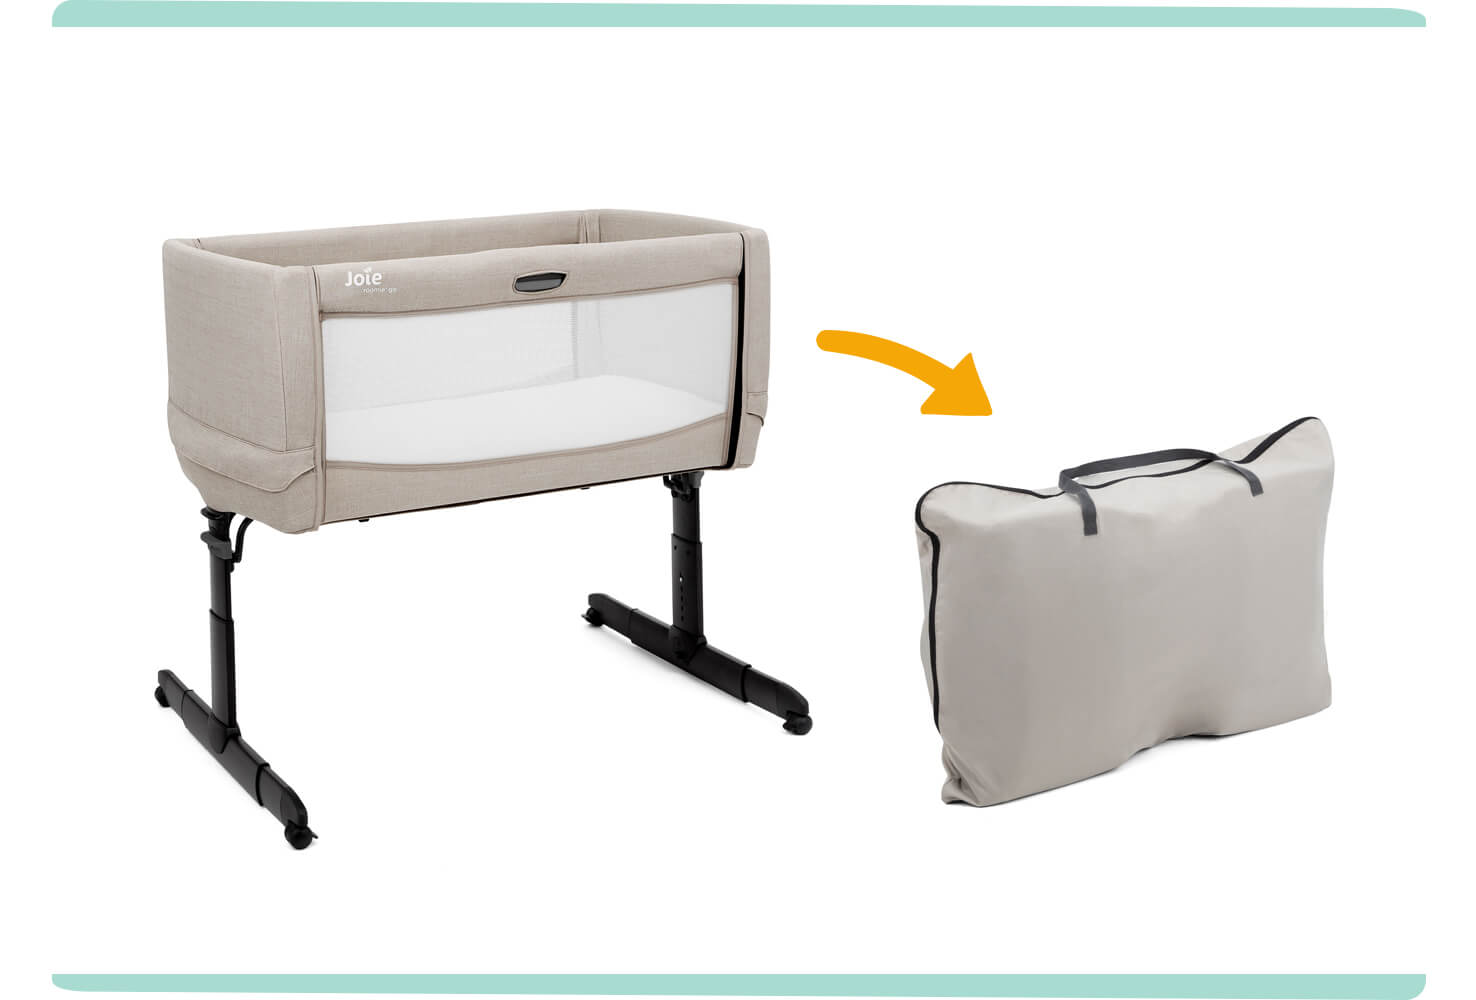 Angled view of the Joie Roomie Go bedside crib with an orange arrow pointing to a folded crib inside a travel bag.